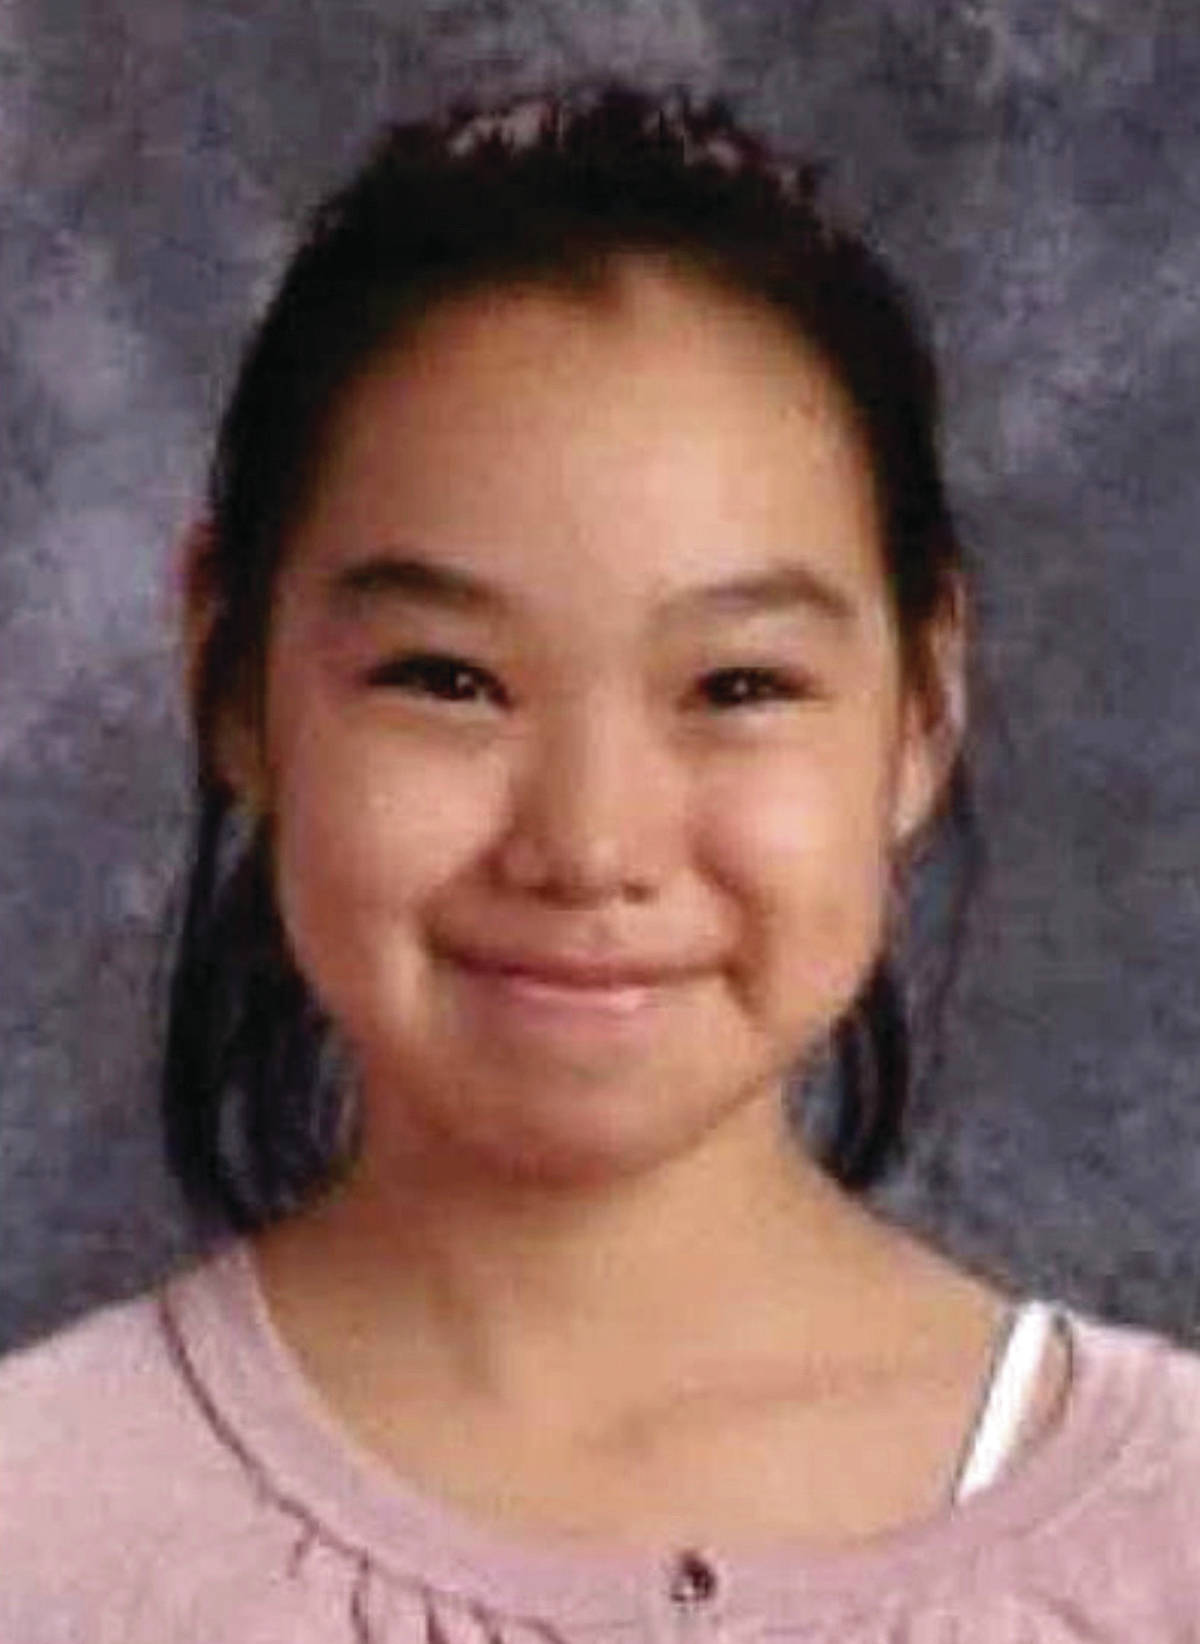 This undated file photo that is part of a missing person poster released by Alaska State Troopers shows Ashley Johnson-Barr. The 10-year-old girl was found dead Friday, Sept. 14, 2018 more than a week after she was reported missing in Kotzebue. Federal charges were filed Monday against Peter Wilson, 41, in connection to the death of Johnson-Barr. (Alaska State Troopers via AP, File)